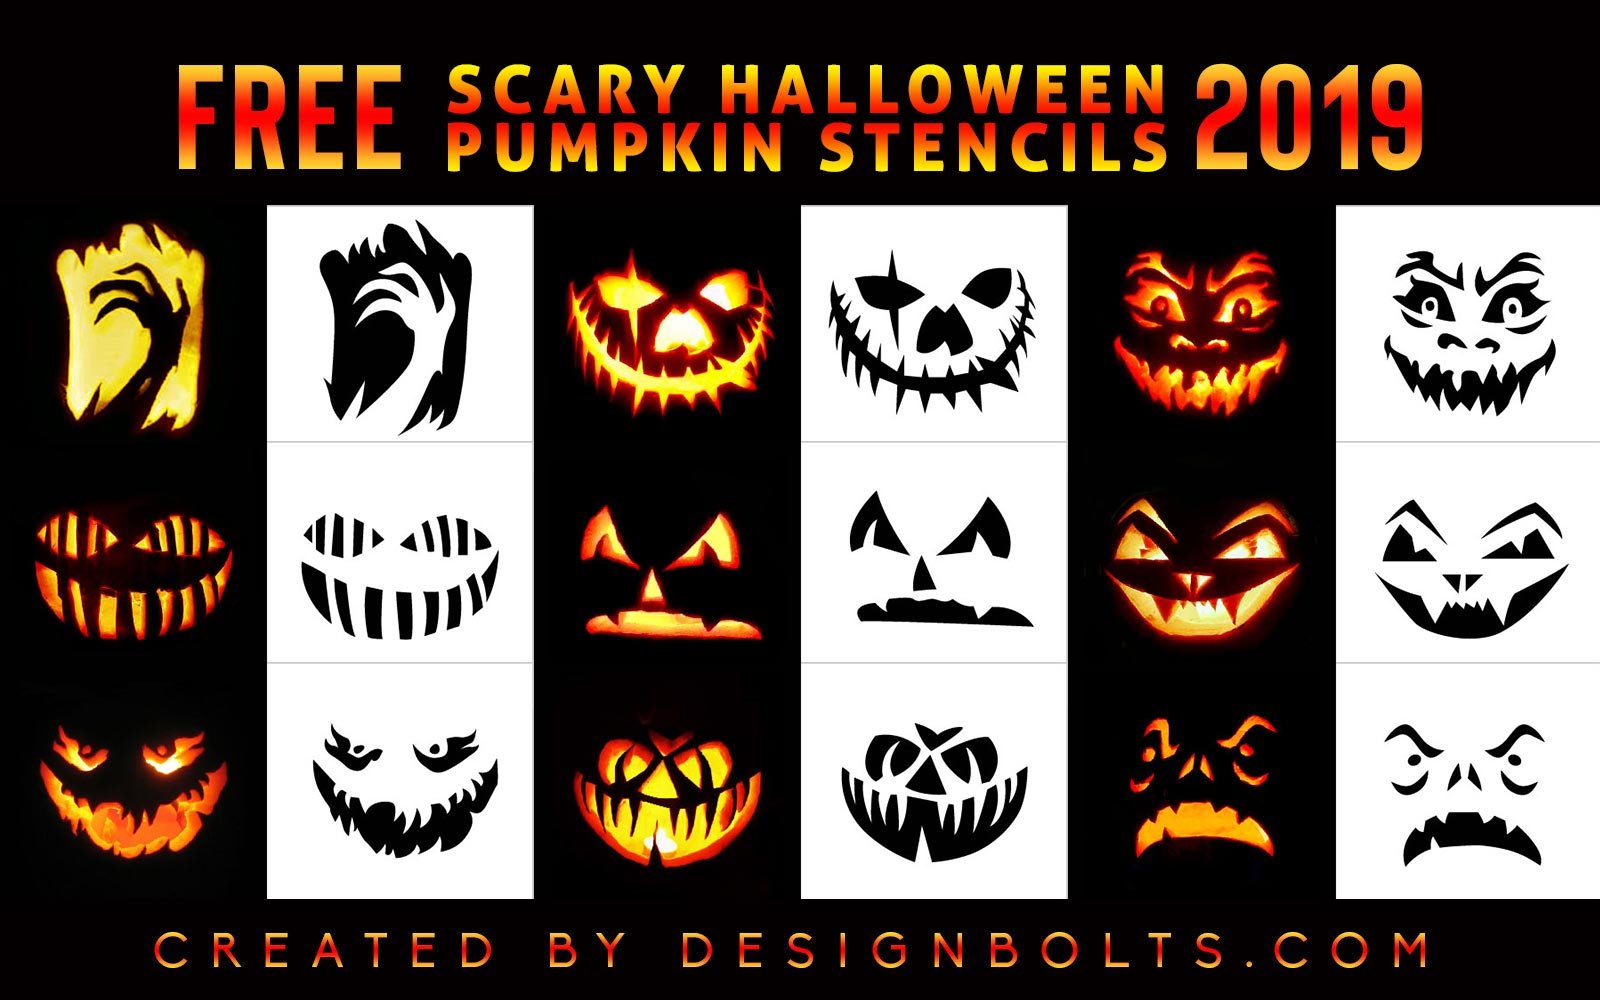 10 More Free Scary Halloween Pumpkin Carving Stencils, Patterns, Faces